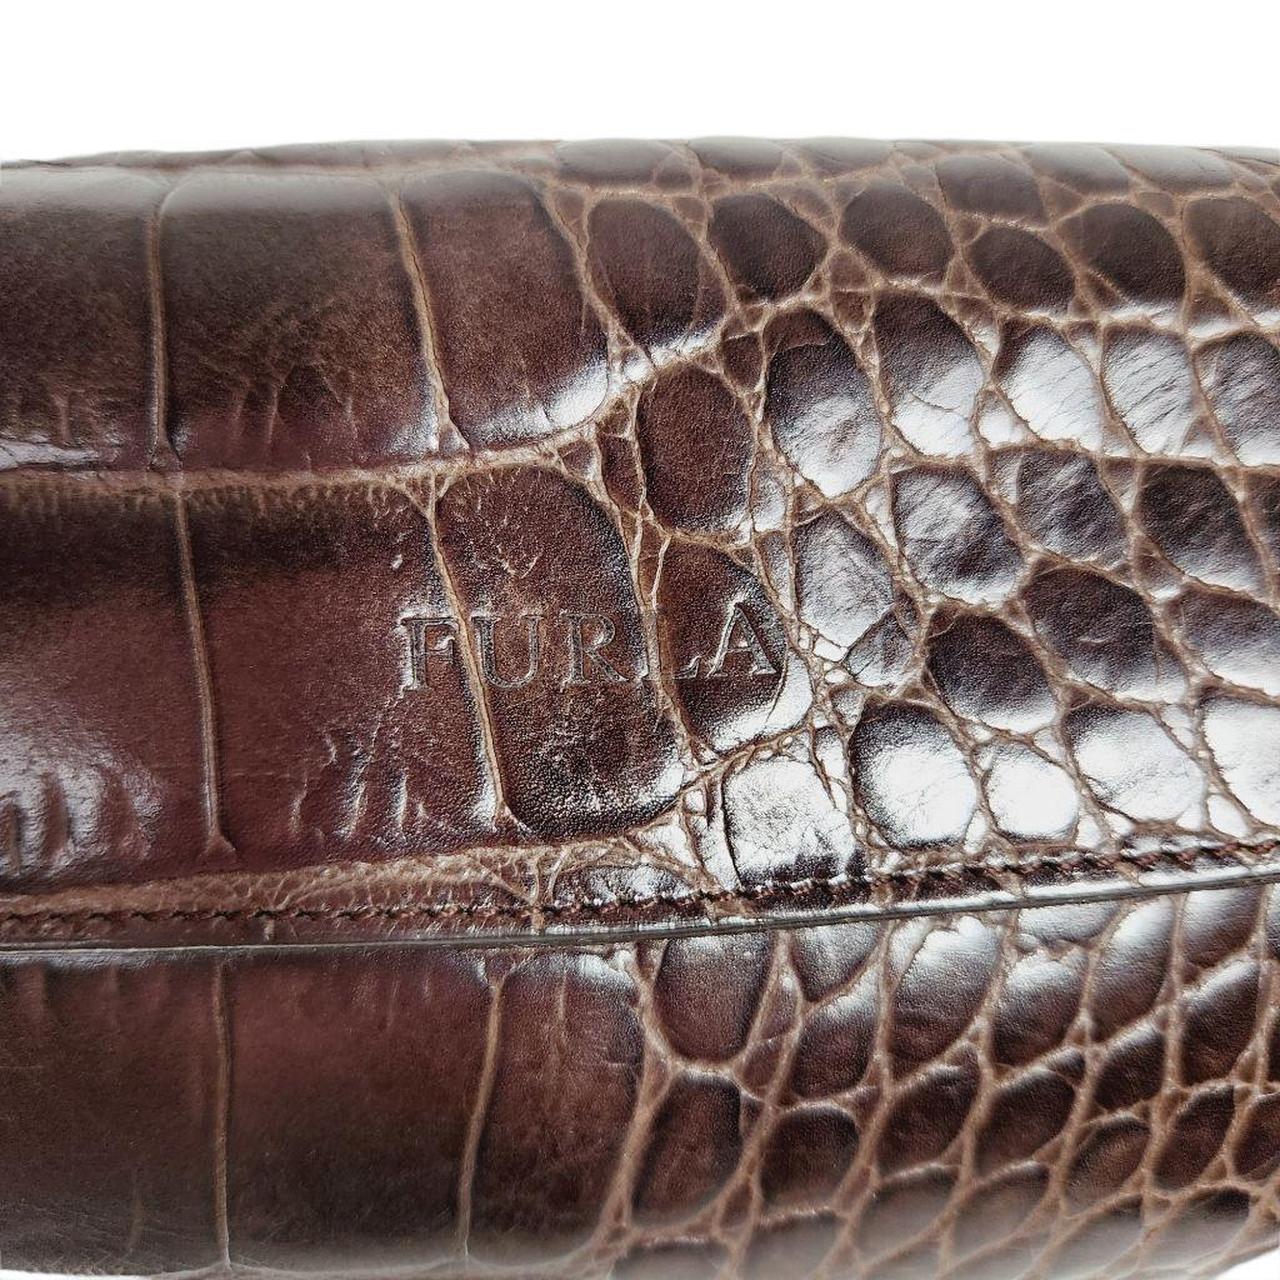 Product Image 3 - Super cute small brown croc